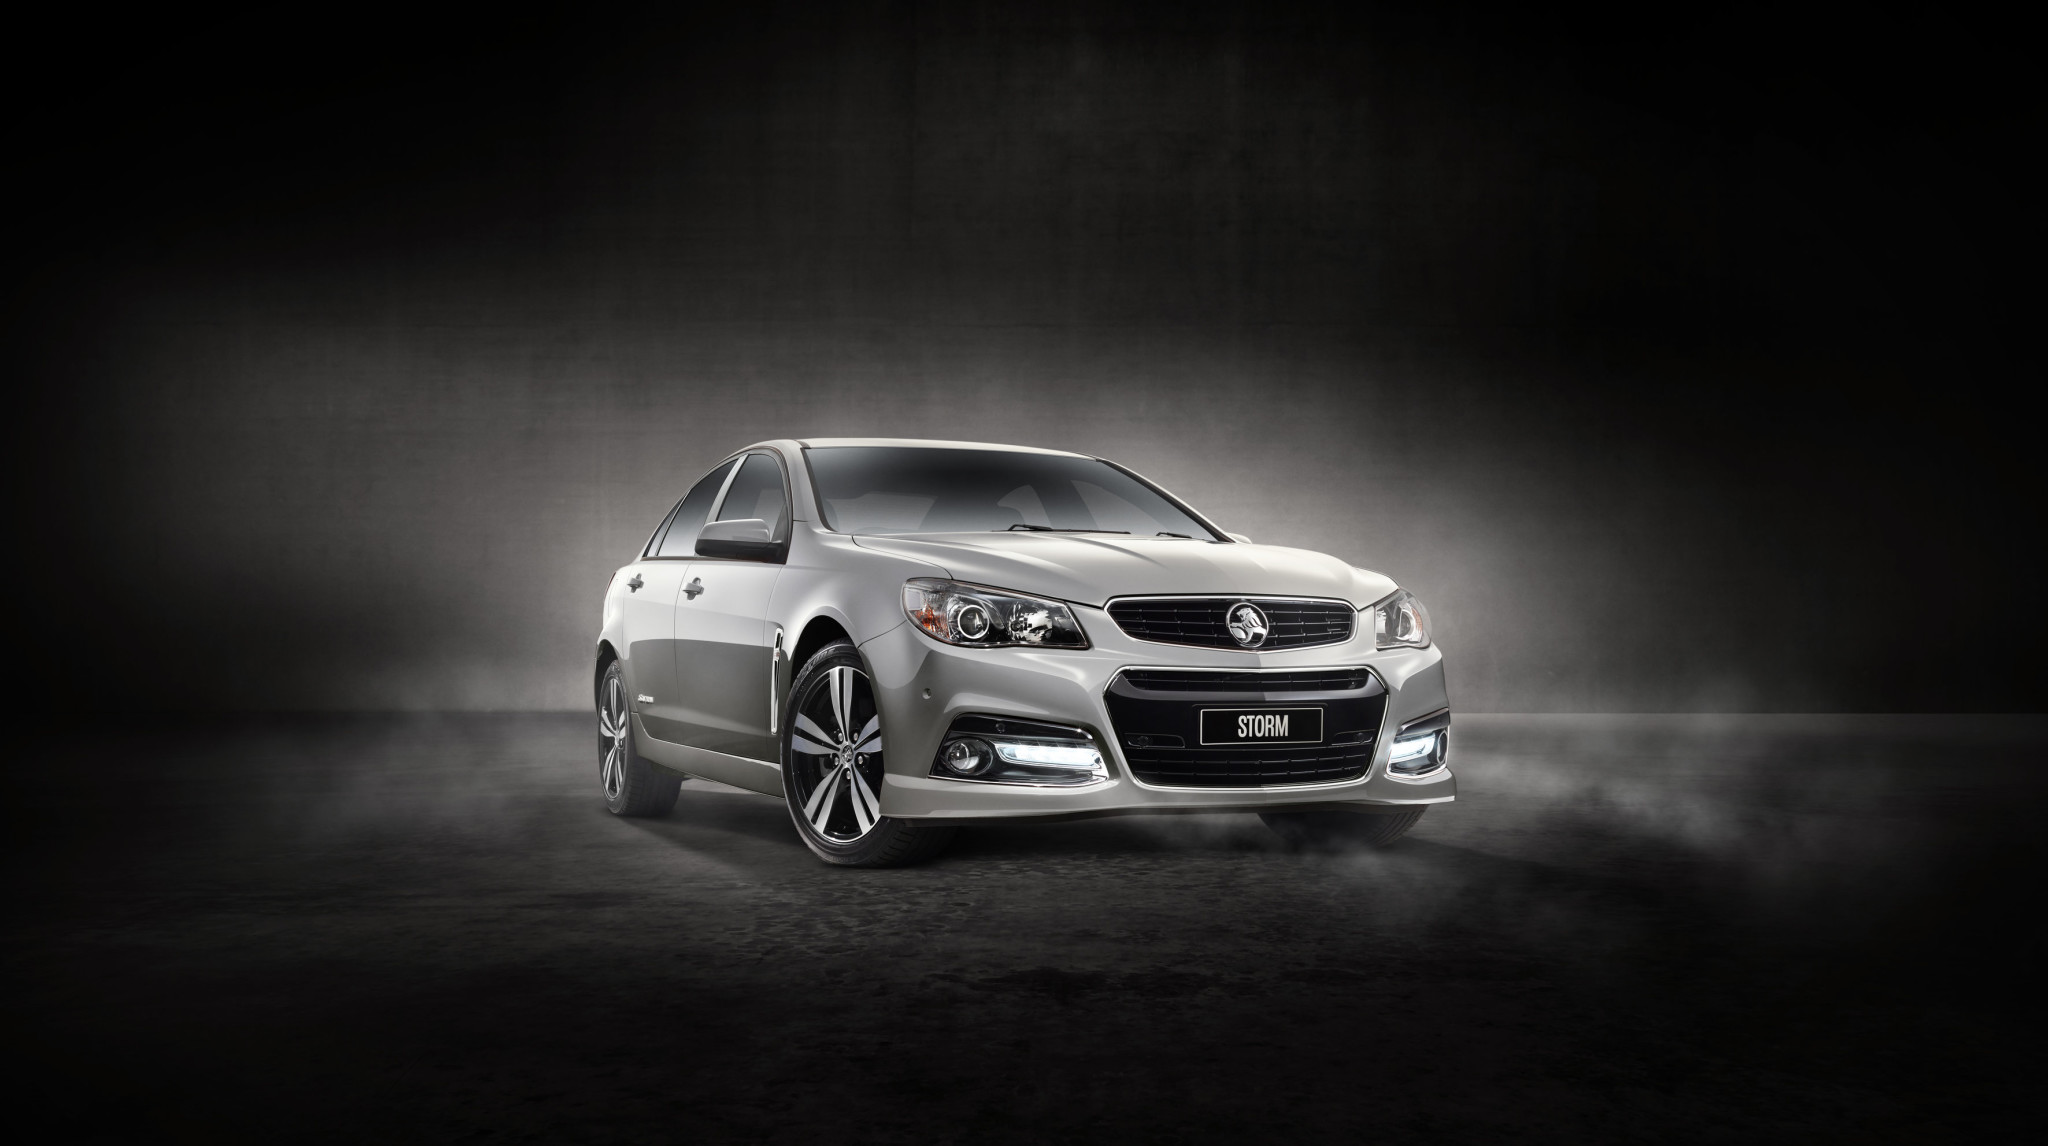 The 2015 Holden Commodore Storm Special Edition